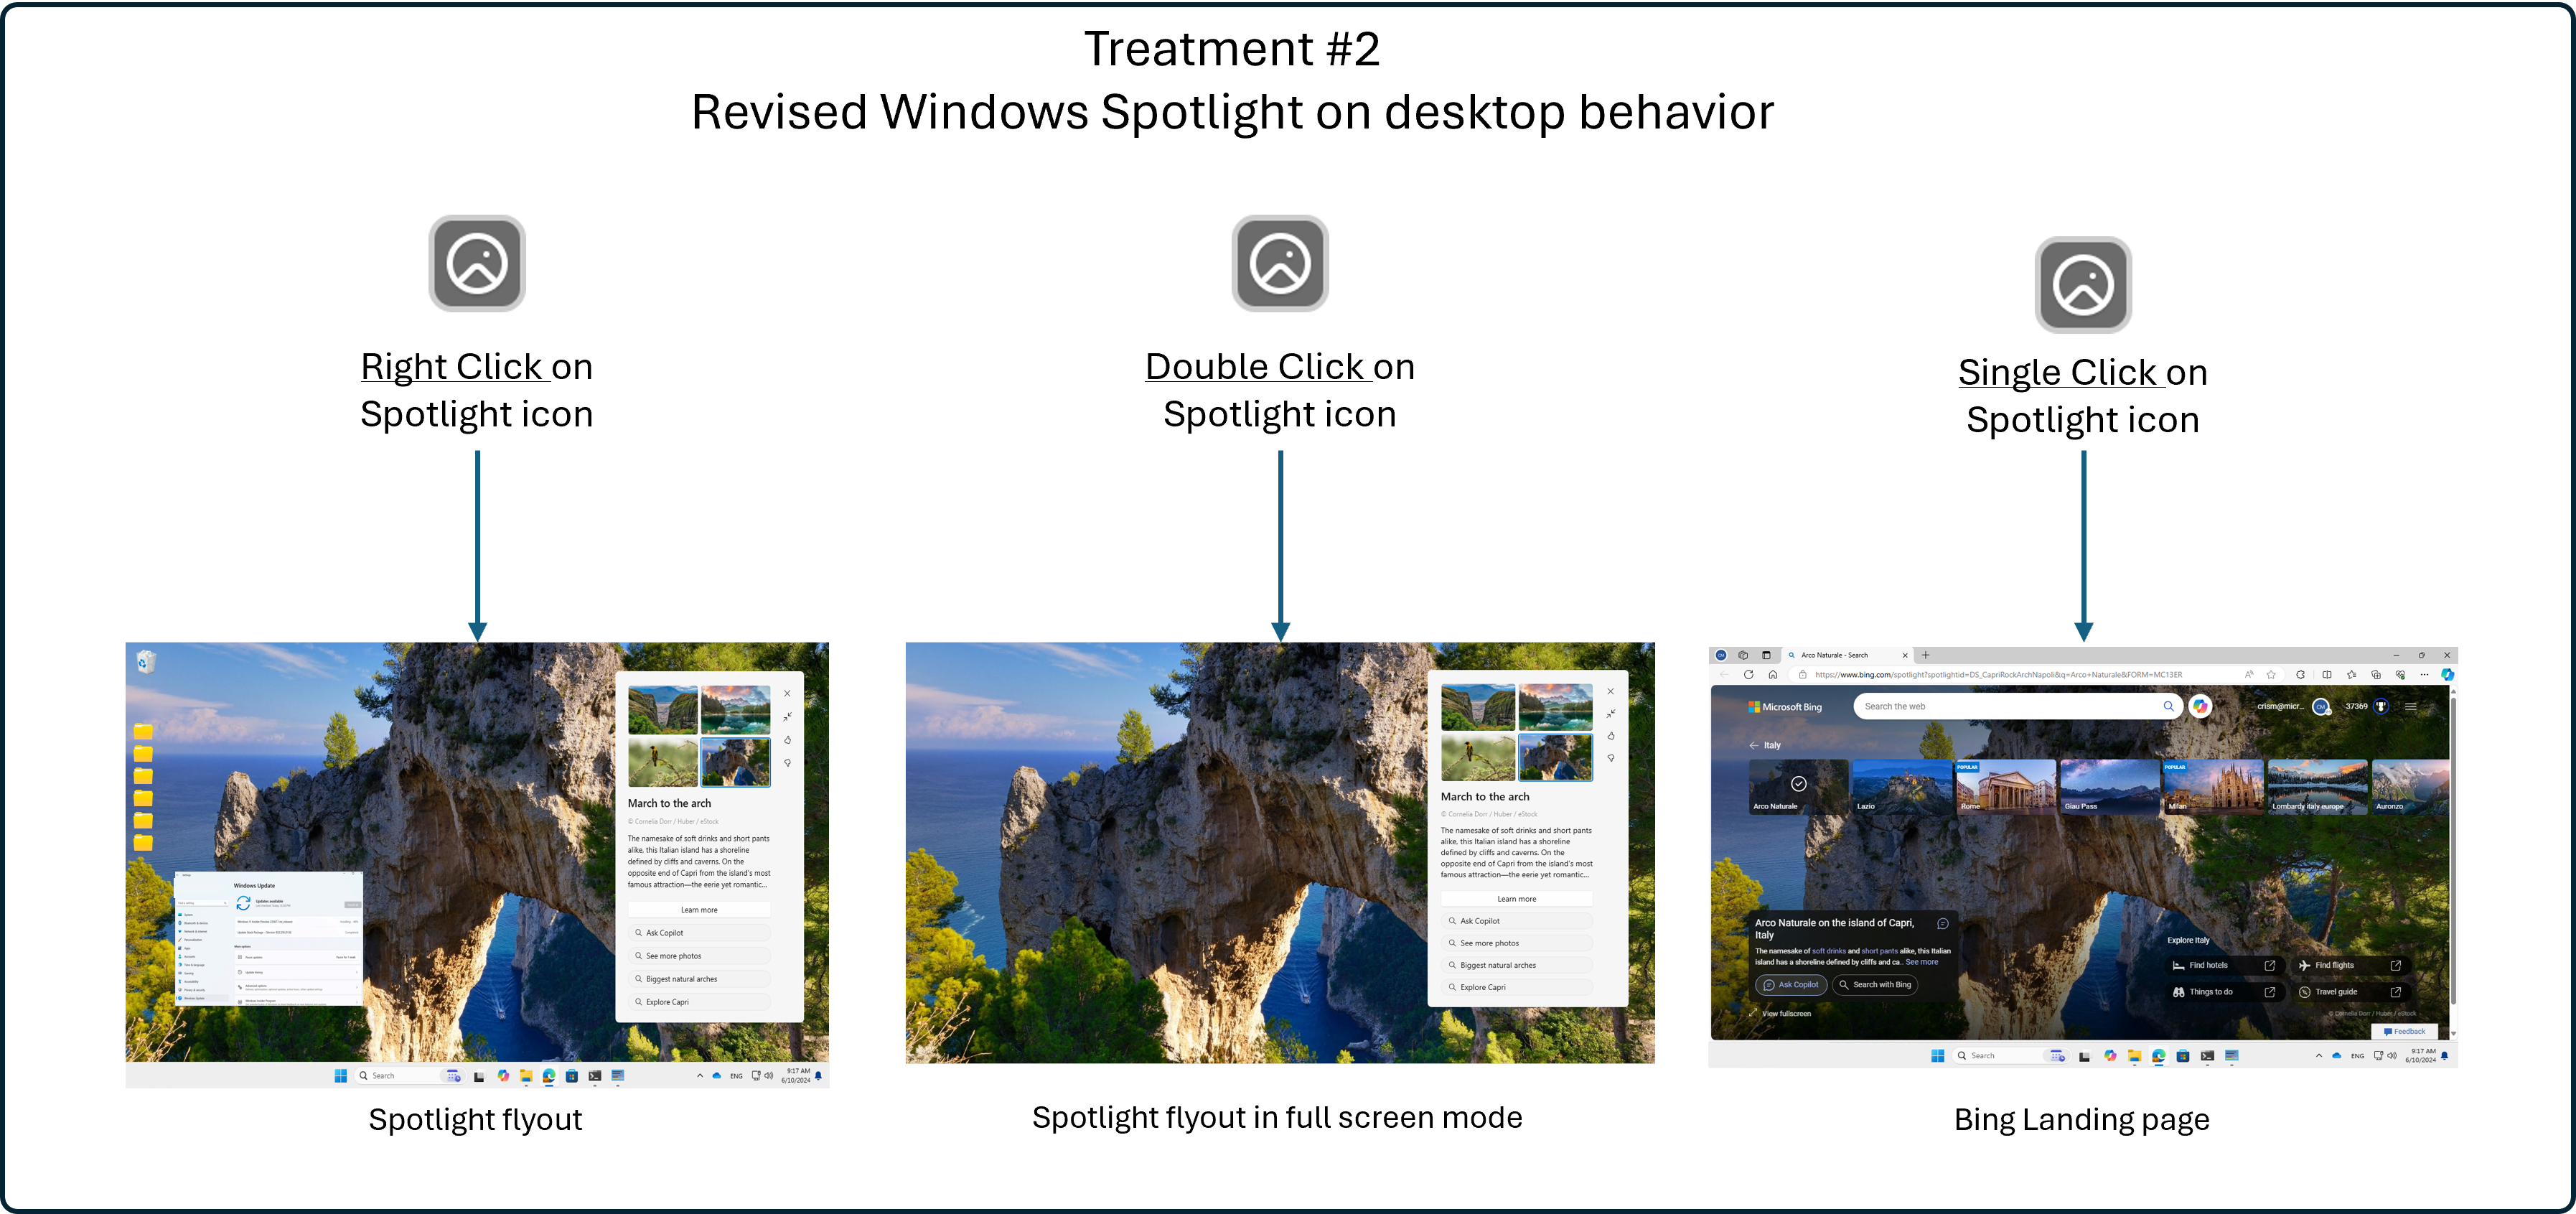 Treatment #2 – if a user right-clicks on the Windows Spotlight icon it will launch the Spotlight experience, while double-clicking will open Windows Spotlight experience in full screen mode. A single click on the Spotlight icon will open the Bing landing page for the image on desktop.